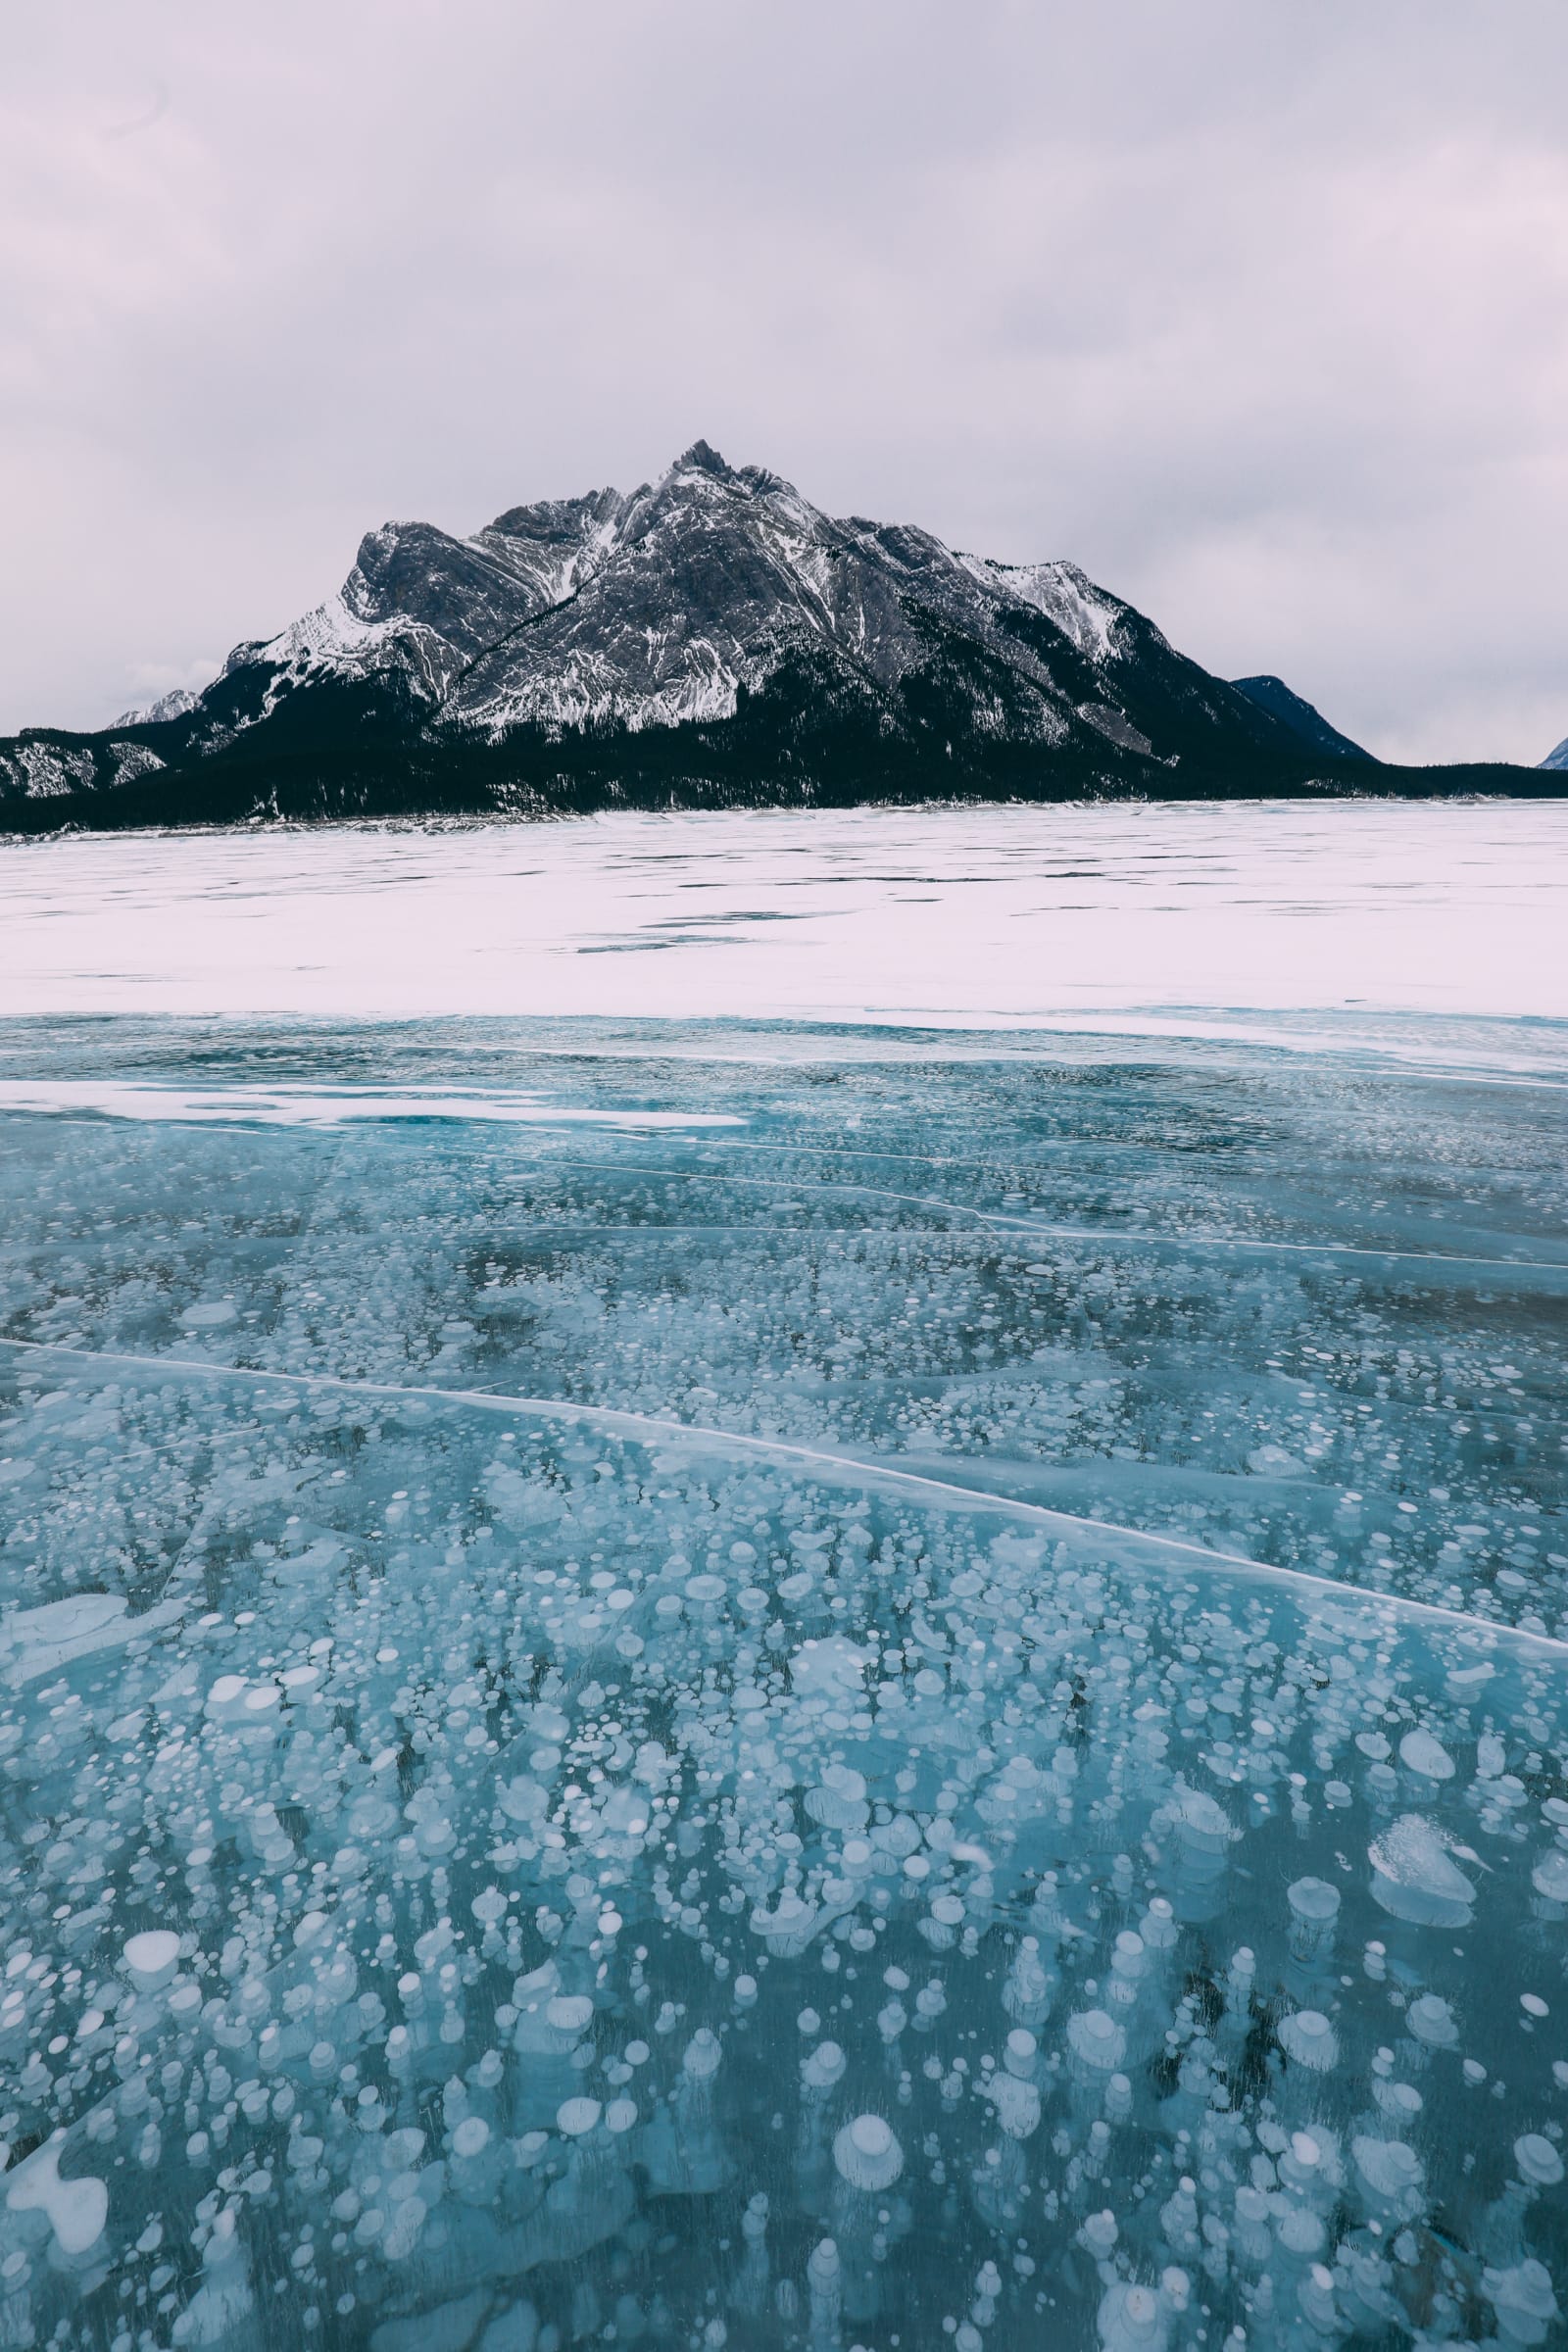 Driving Canada's Epic Icefields Parkway And Finding The Frozen Bubbles Of Abraham Lake (25)